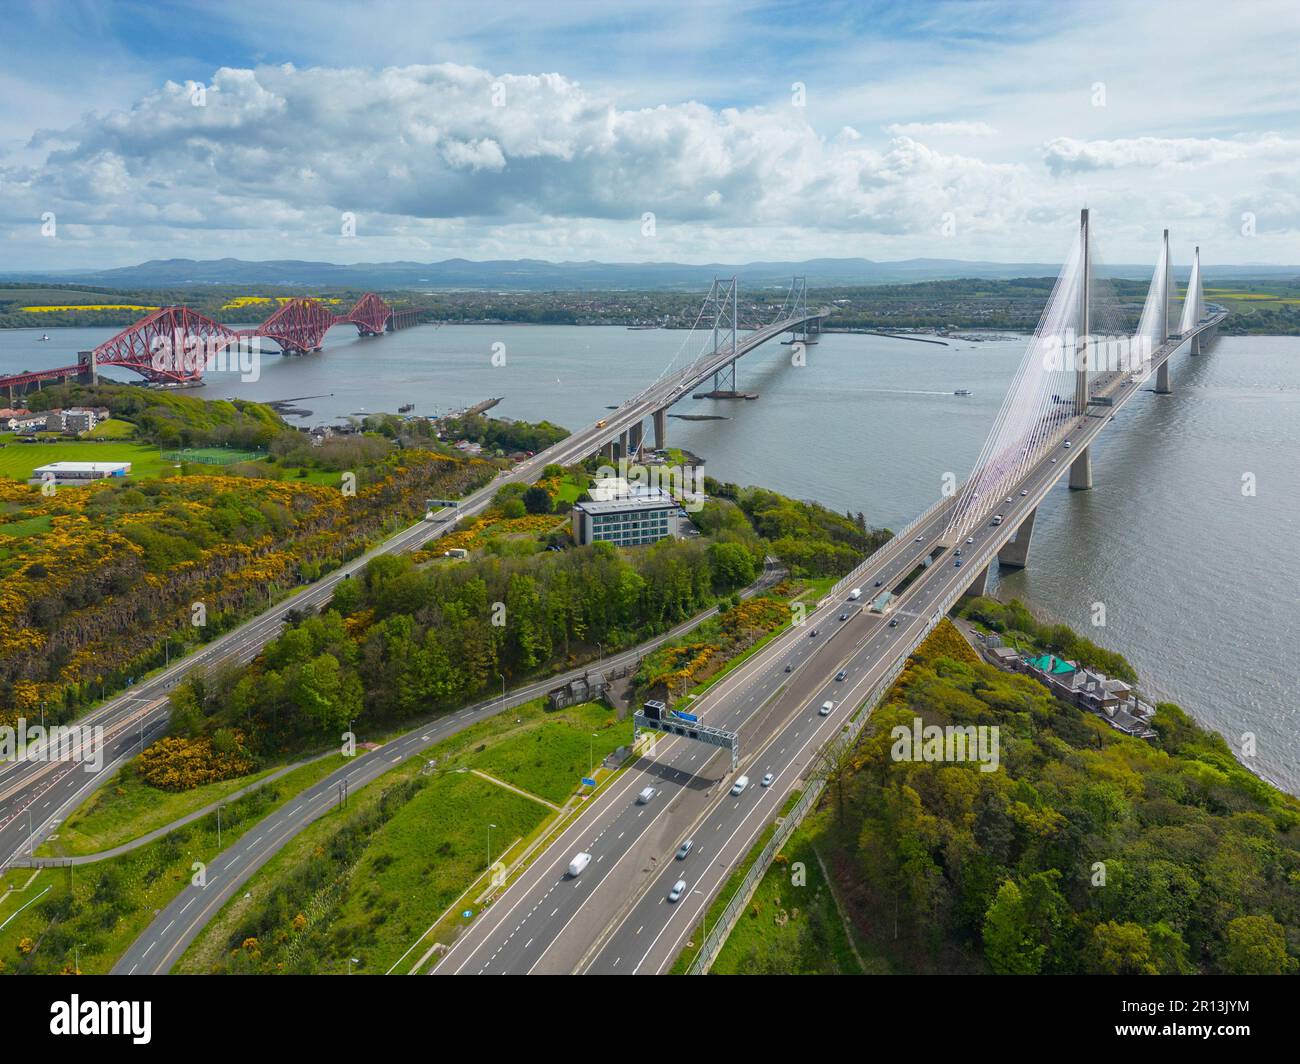 Aerial view of three bridges crossing the Fiver Forth at North Queensferry, Fife, Scotland, UK. Forth bridge (L), Forth Road bridge and Queensferry Cr Stock Photo